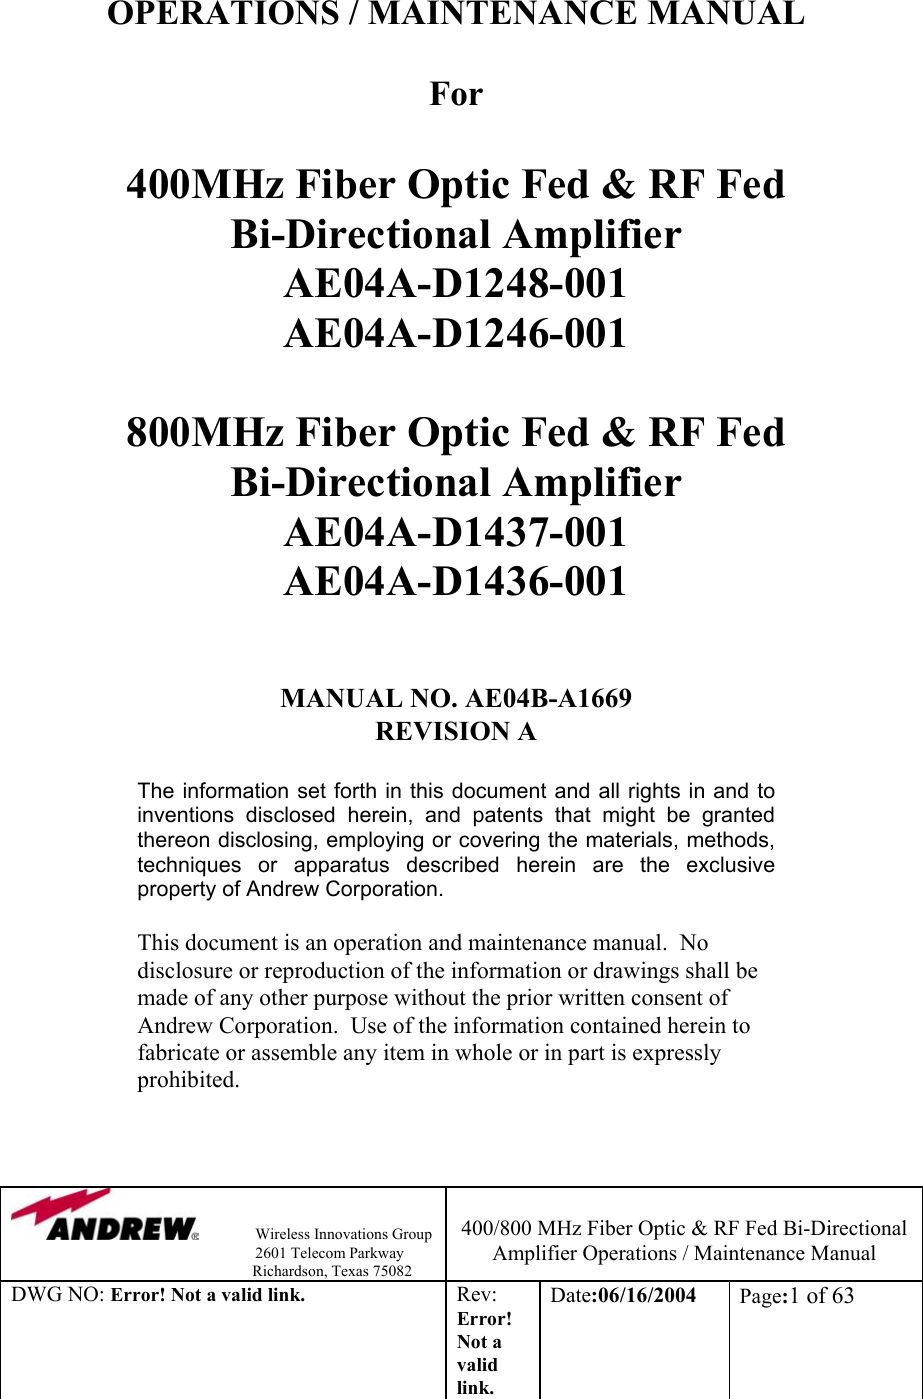                Wireless Innovations Group                                                                   2601 Telecom Parkway                                                         Richardson, Texas 75082  400/800 MHz Fiber Optic &amp; RF Fed Bi-Directional Amplifier Operations / Maintenance Manual DWG NO: Error! Not a valid link. Rev: Error! Not a valid link. Date:06/16/2004  Page:1 of 63   OPERATIONS / MAINTENANCE MANUAL  For   400MHz Fiber Optic Fed &amp; RF Fed  Bi-Directional Amplifier AE04A-D1248-001 AE04A-D1246-001  800MHz Fiber Optic Fed &amp; RF Fed  Bi-Directional Amplifier AE04A-D1437-001 AE04A-D1436-001   MANUAL NO. AE04B-A1669  REVISION A  The information set forth in this document and all rights in and to inventions disclosed herein, and patents that might be granted thereon disclosing, employing or covering the materials, methods, techniques or apparatus described herein are the exclusive property of Andrew Corporation.  This document is an operation and maintenance manual.  No disclosure or reproduction of the information or drawings shall be made of any other purpose without the prior written consent of Andrew Corporation.  Use of the information contained herein to fabricate or assemble any item in whole or in part is expressly prohibited.     